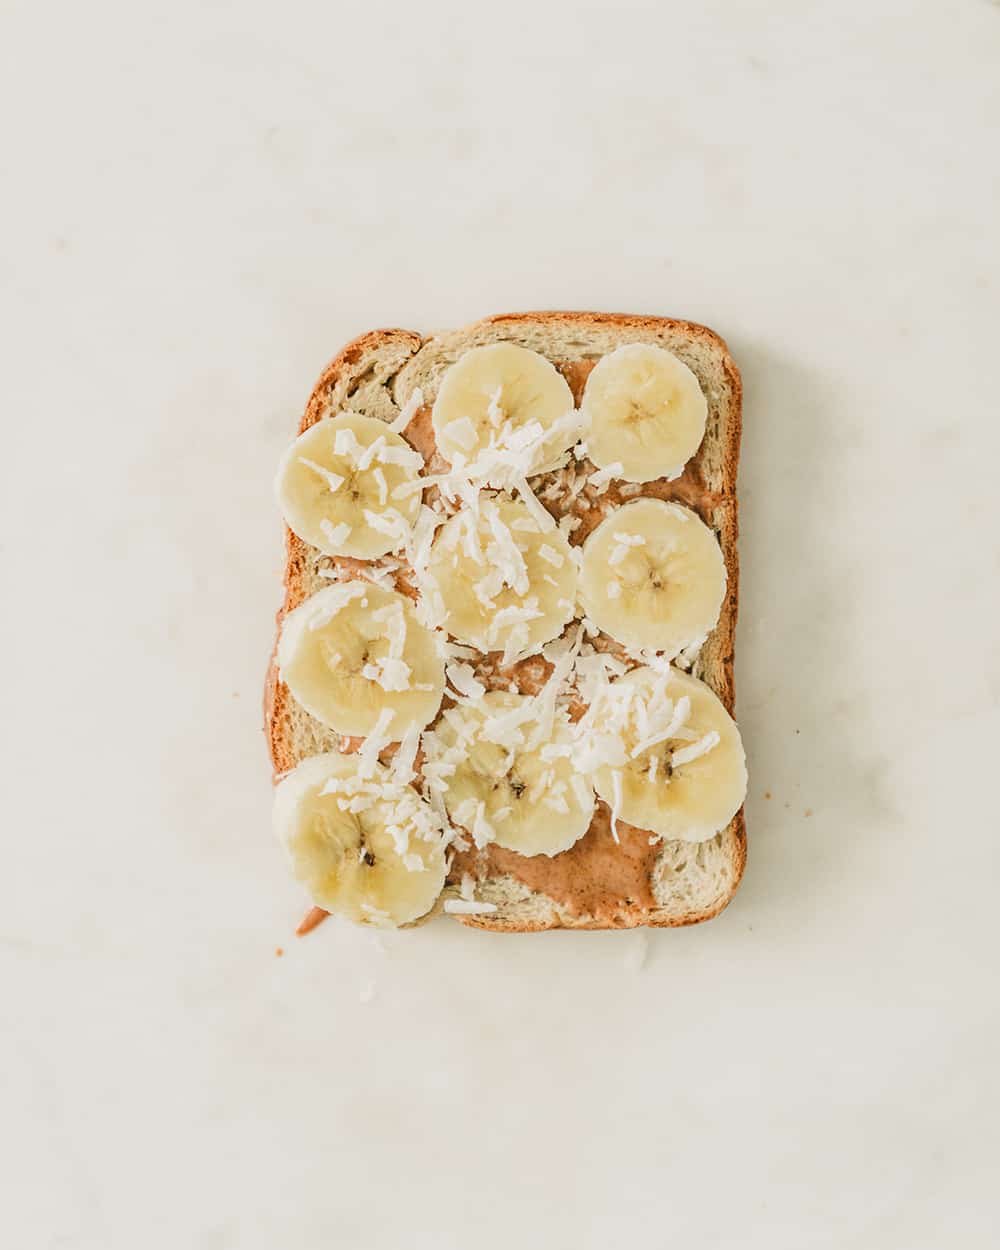 Banana and almond butter toast toppings